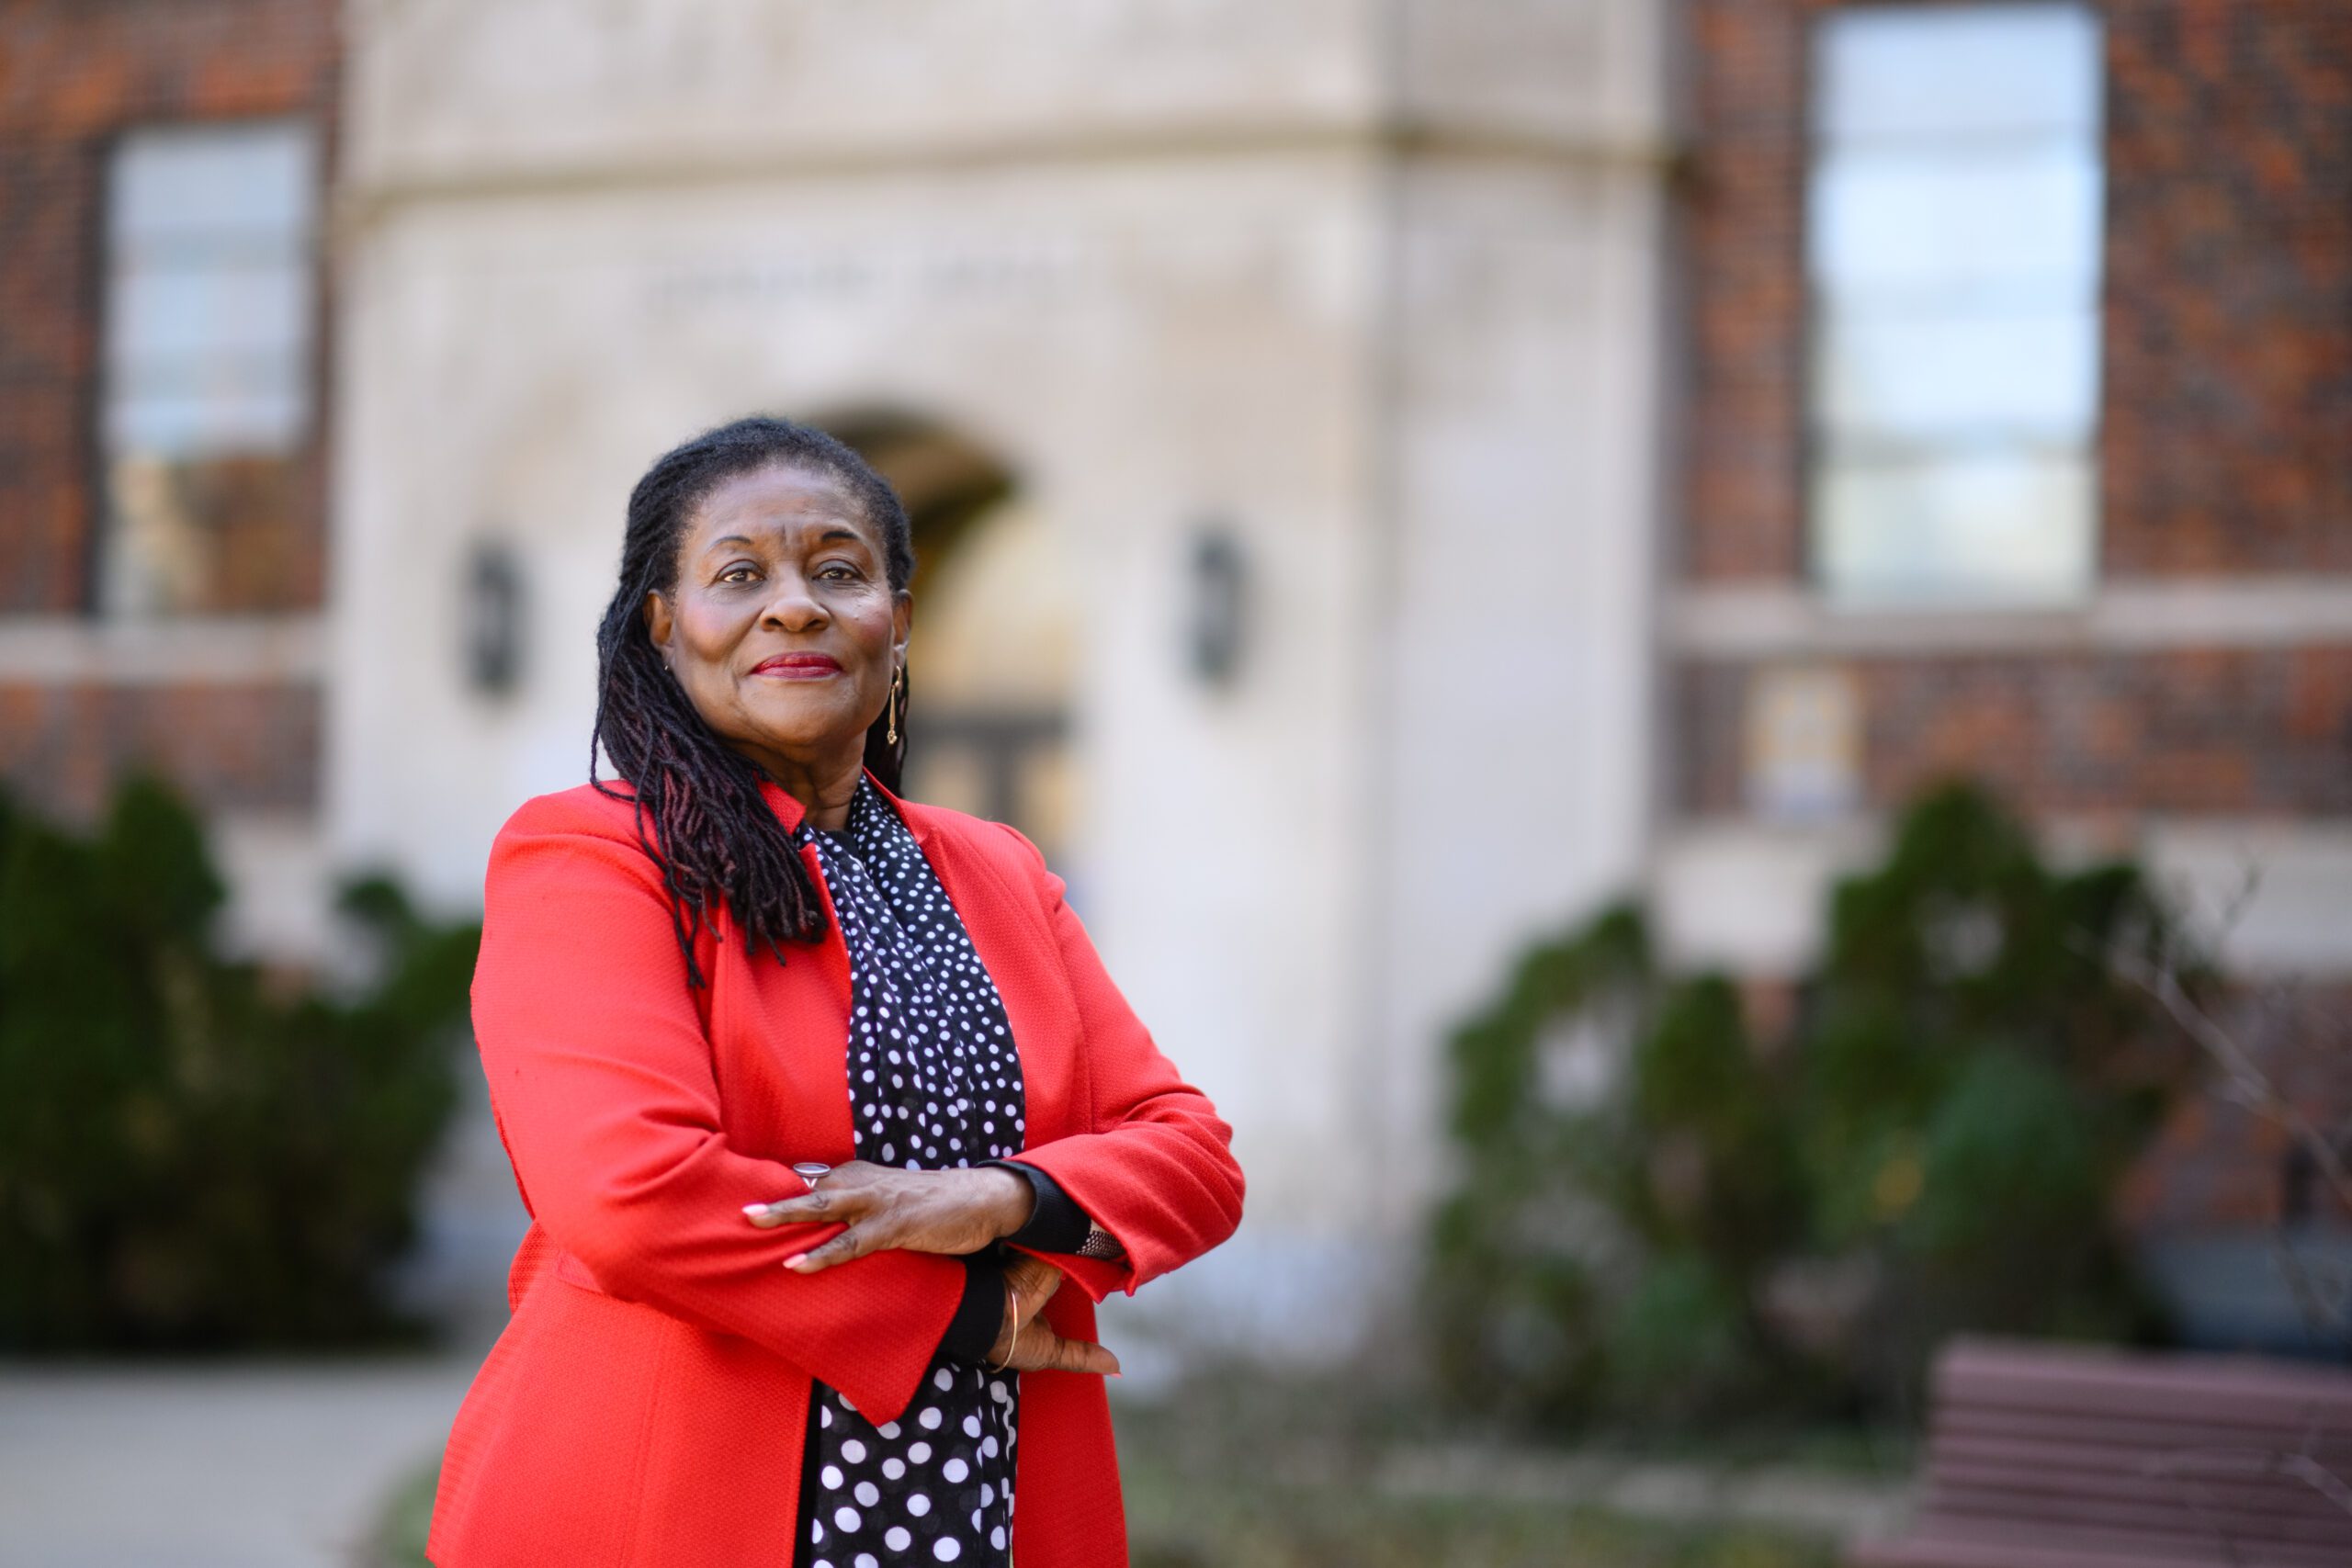 Paulette Ramsay crosses her arms for a photo outside of Sikes Hall on a mild February morning.